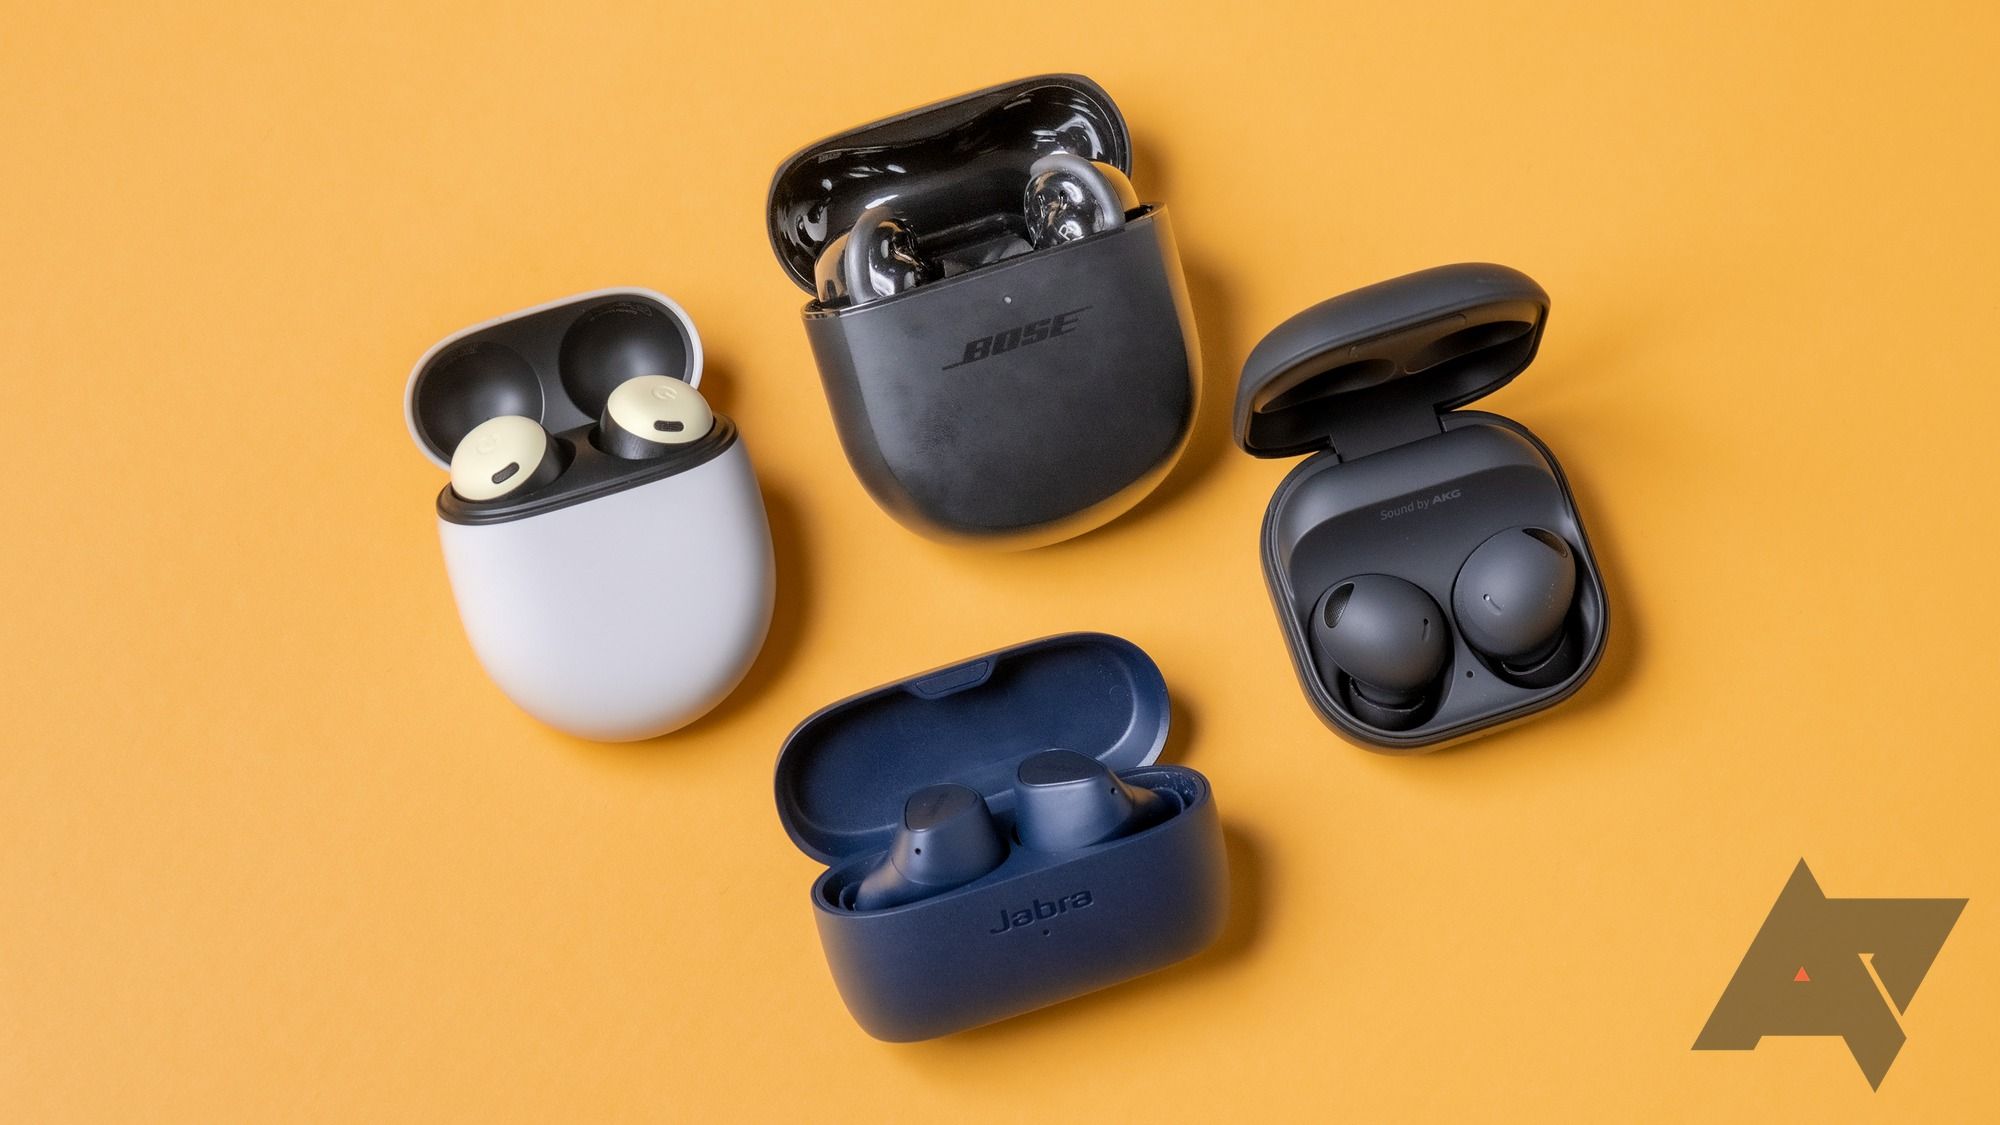 Every Major Wireless Earbuds Brand Ranked Worst To Best